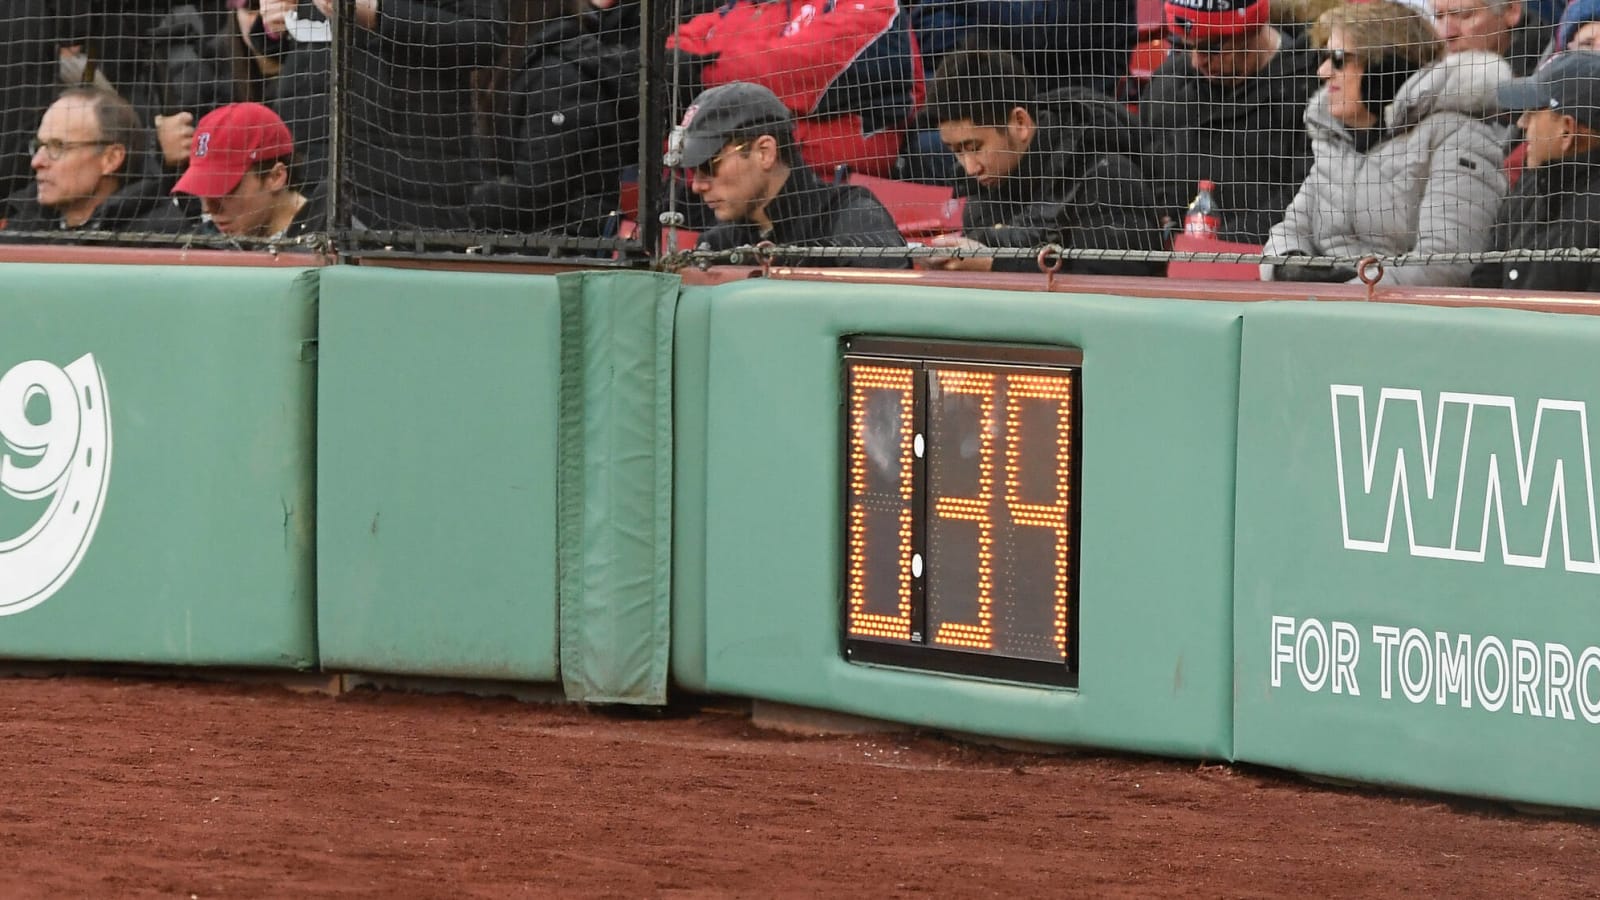 MLB's new rules cut game times drastically in 2023